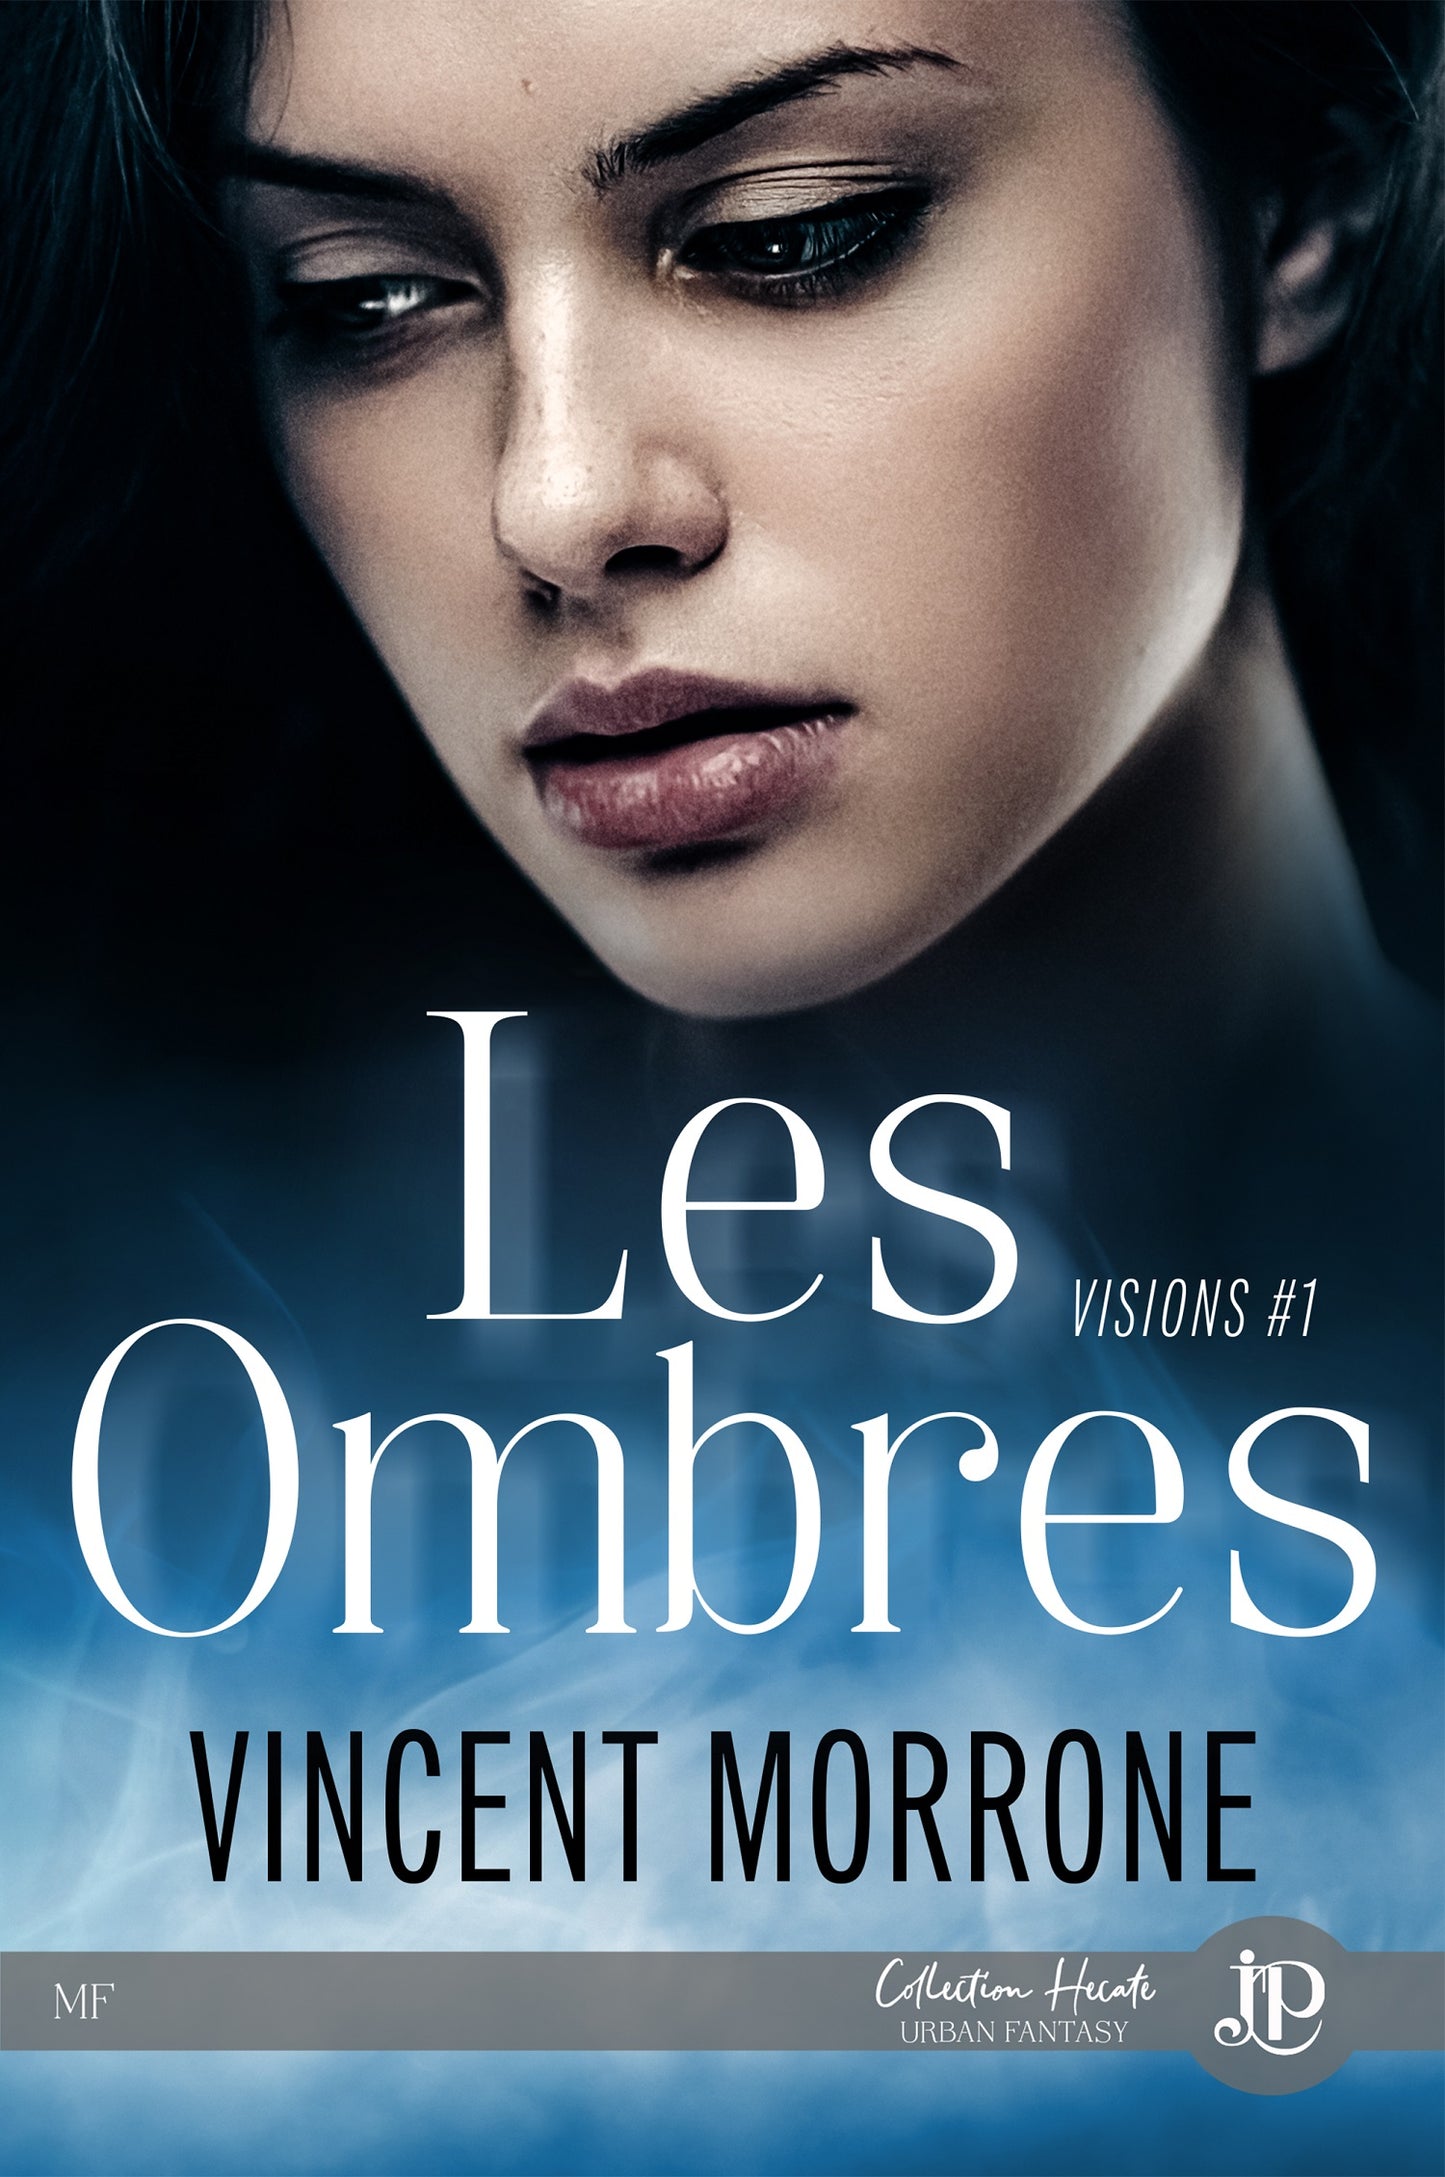 Visions #1 : Les ombres